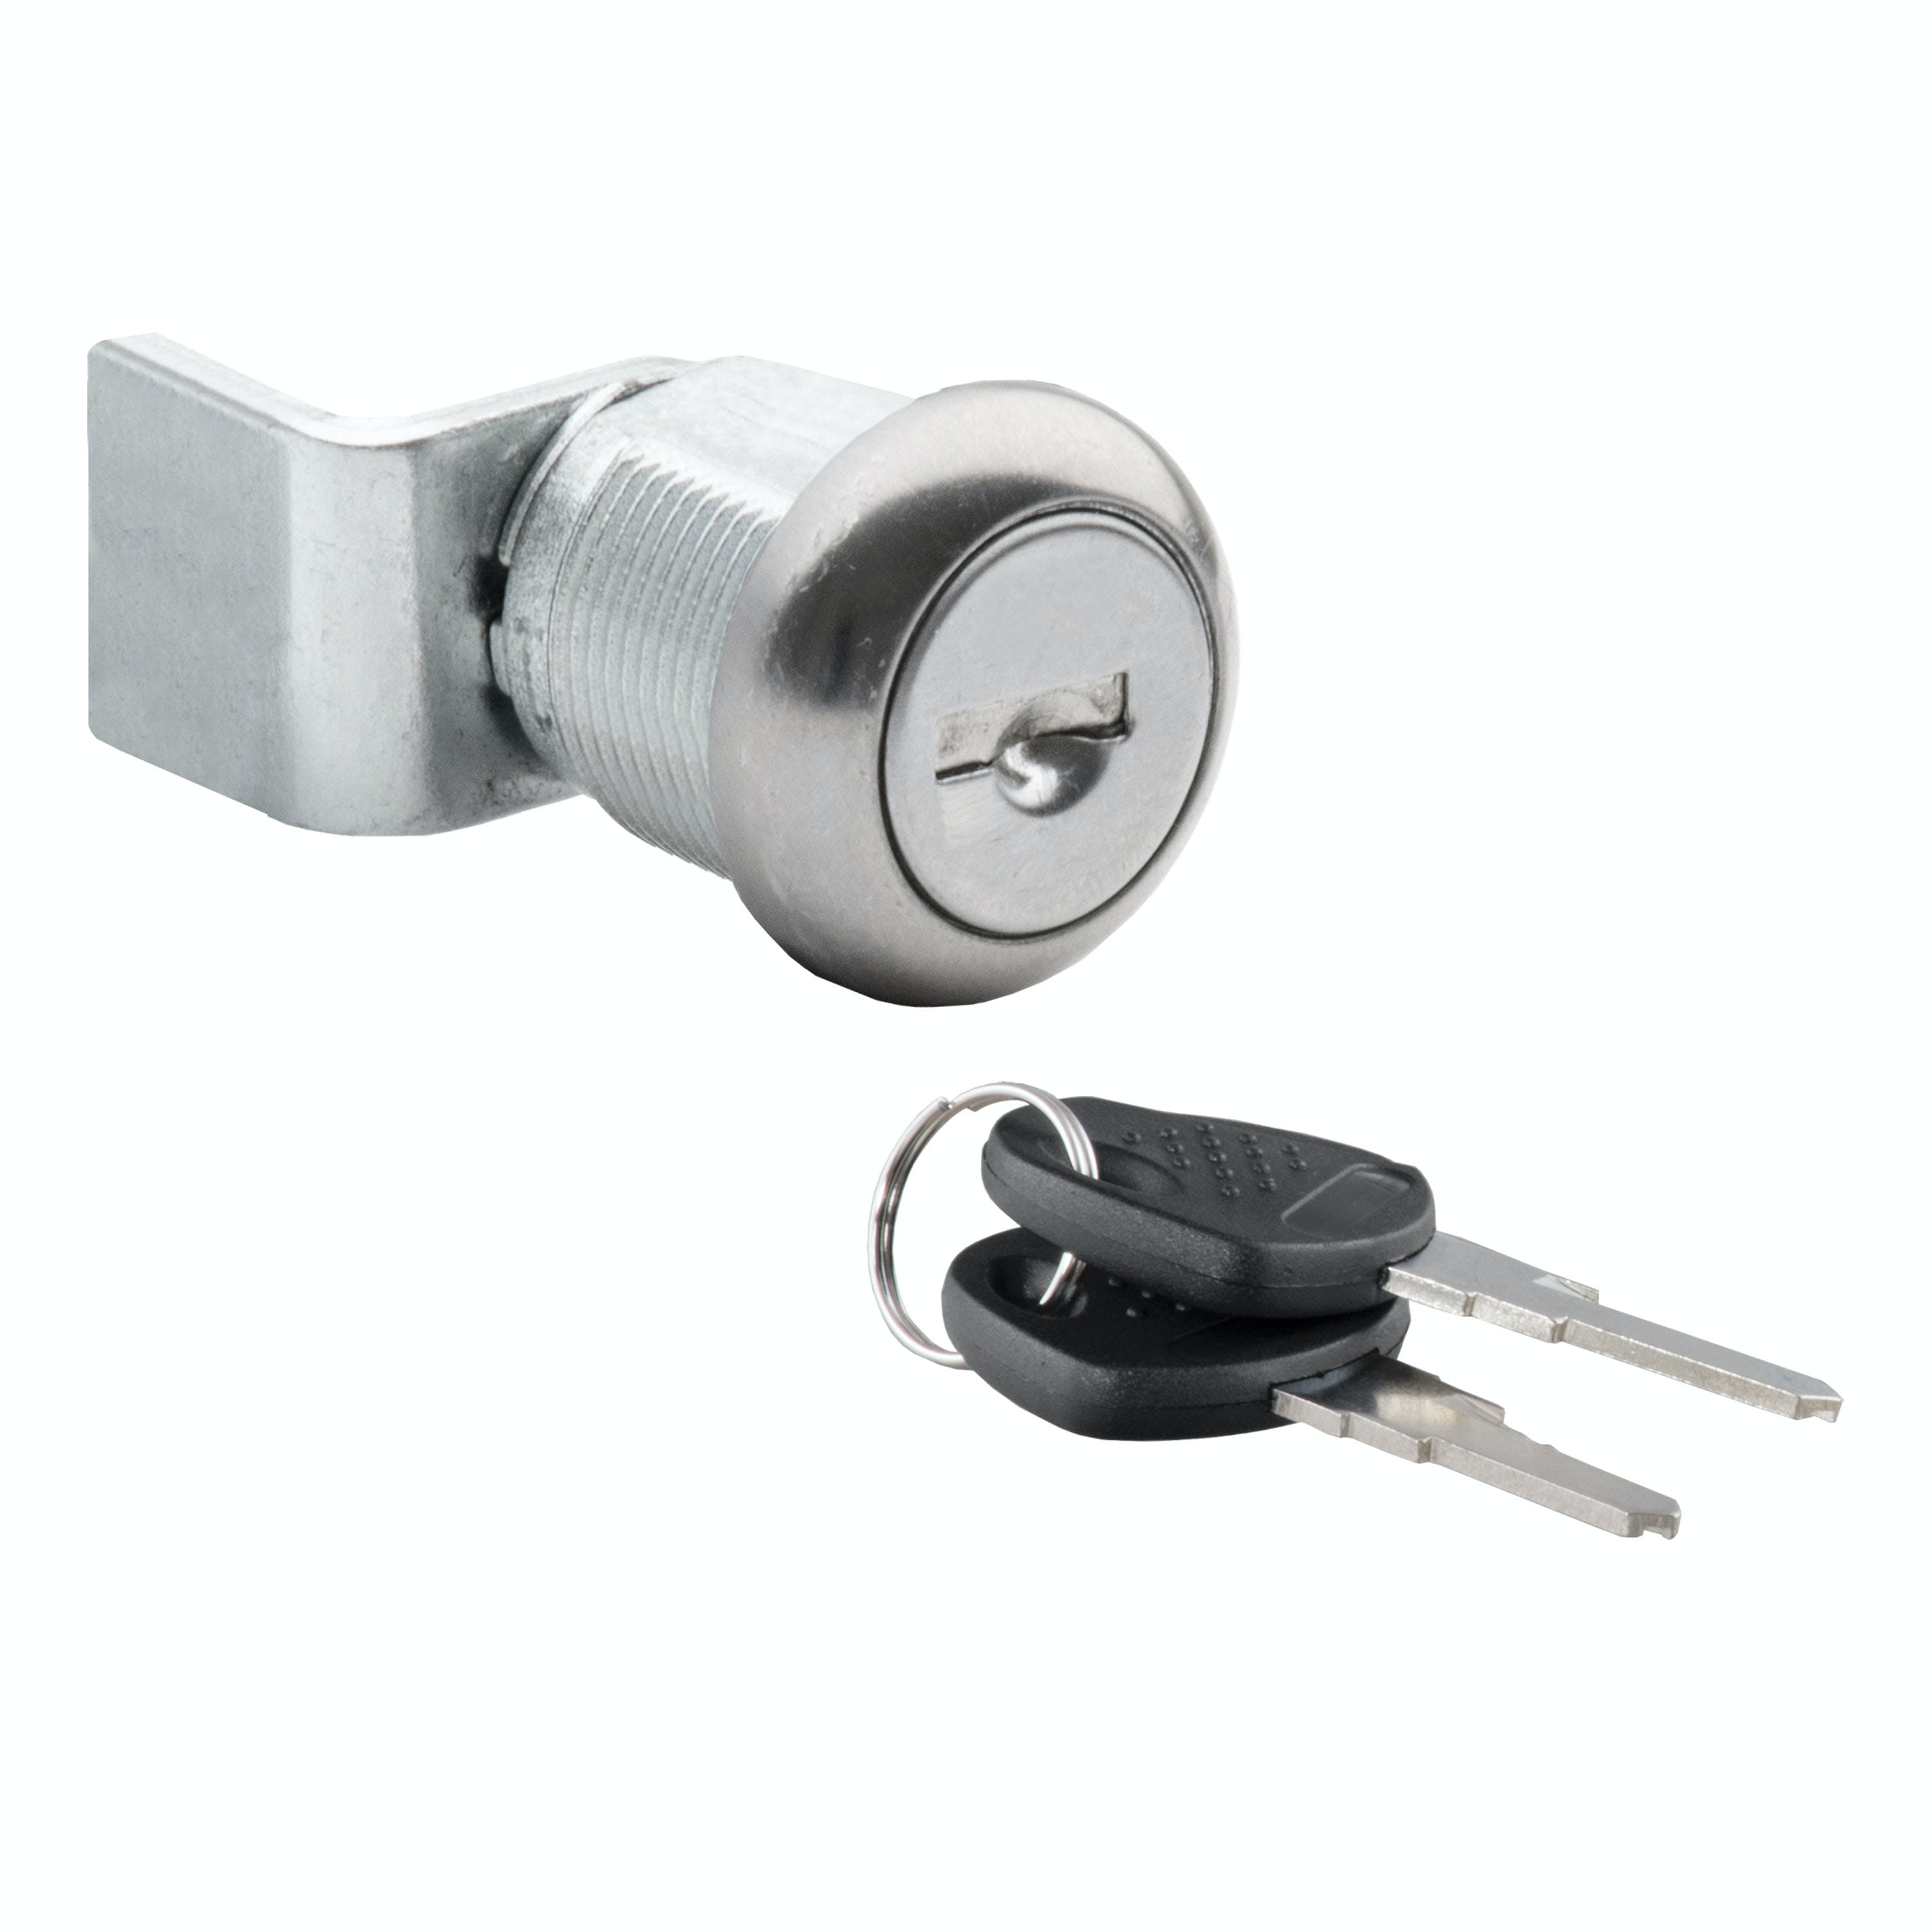 UWS 003-RYTHCY-005 Replacement T-Handle Lock Cylinder and Keys